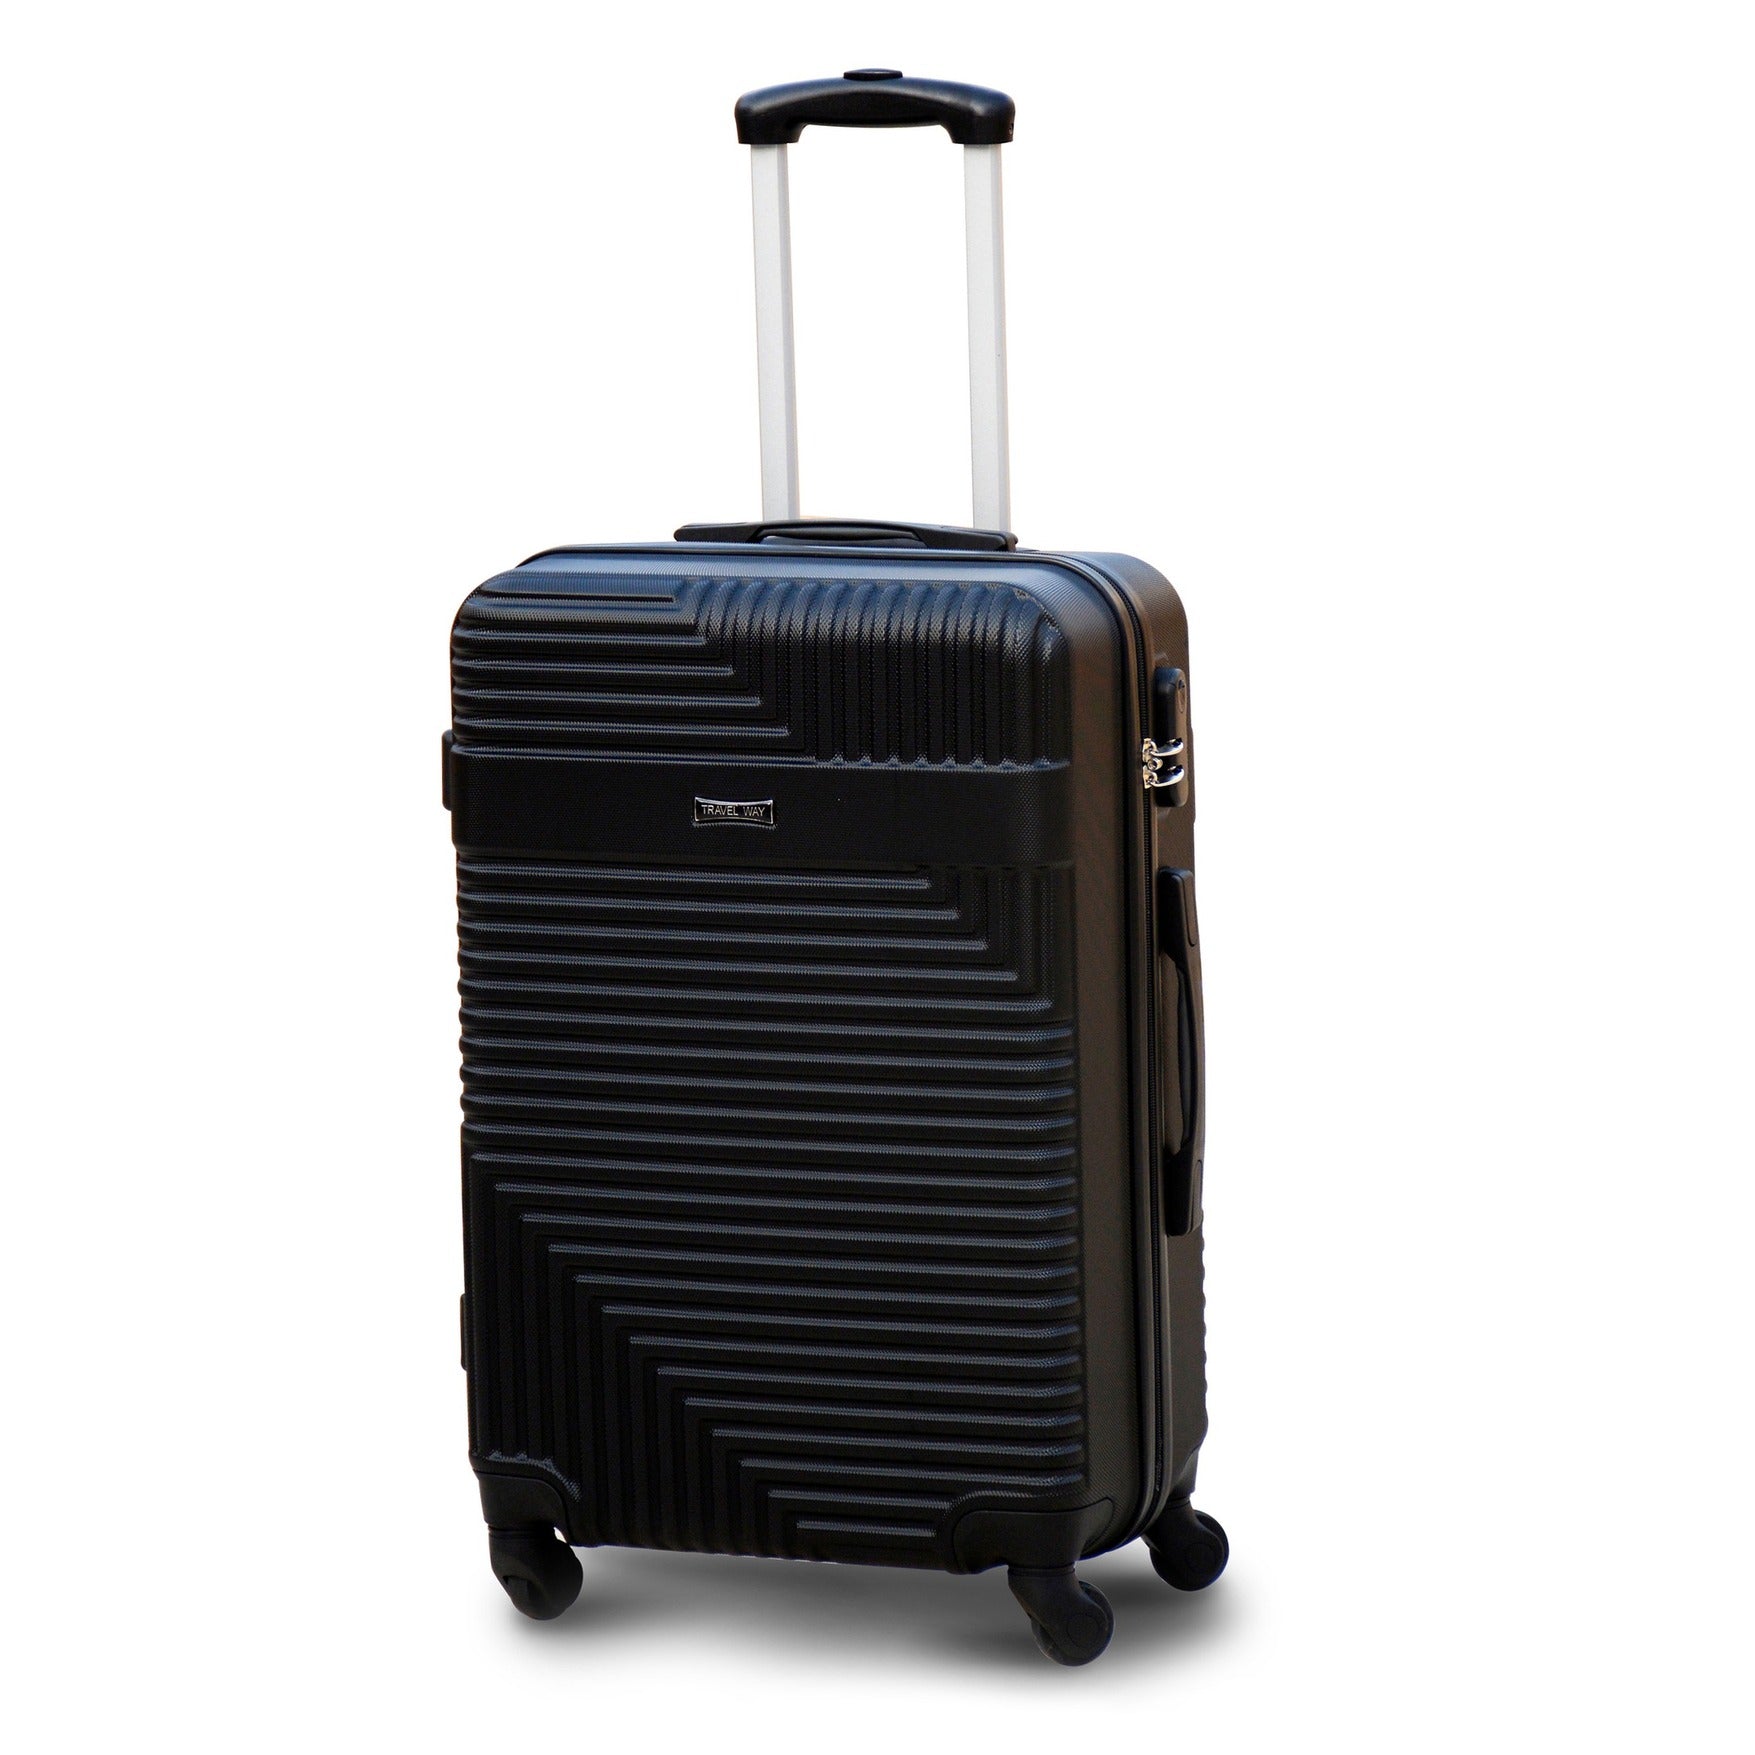 24" Black Colour Travel Way ABS Luggage Lightweight Hard Case Spinner Wheel Trolley Bag